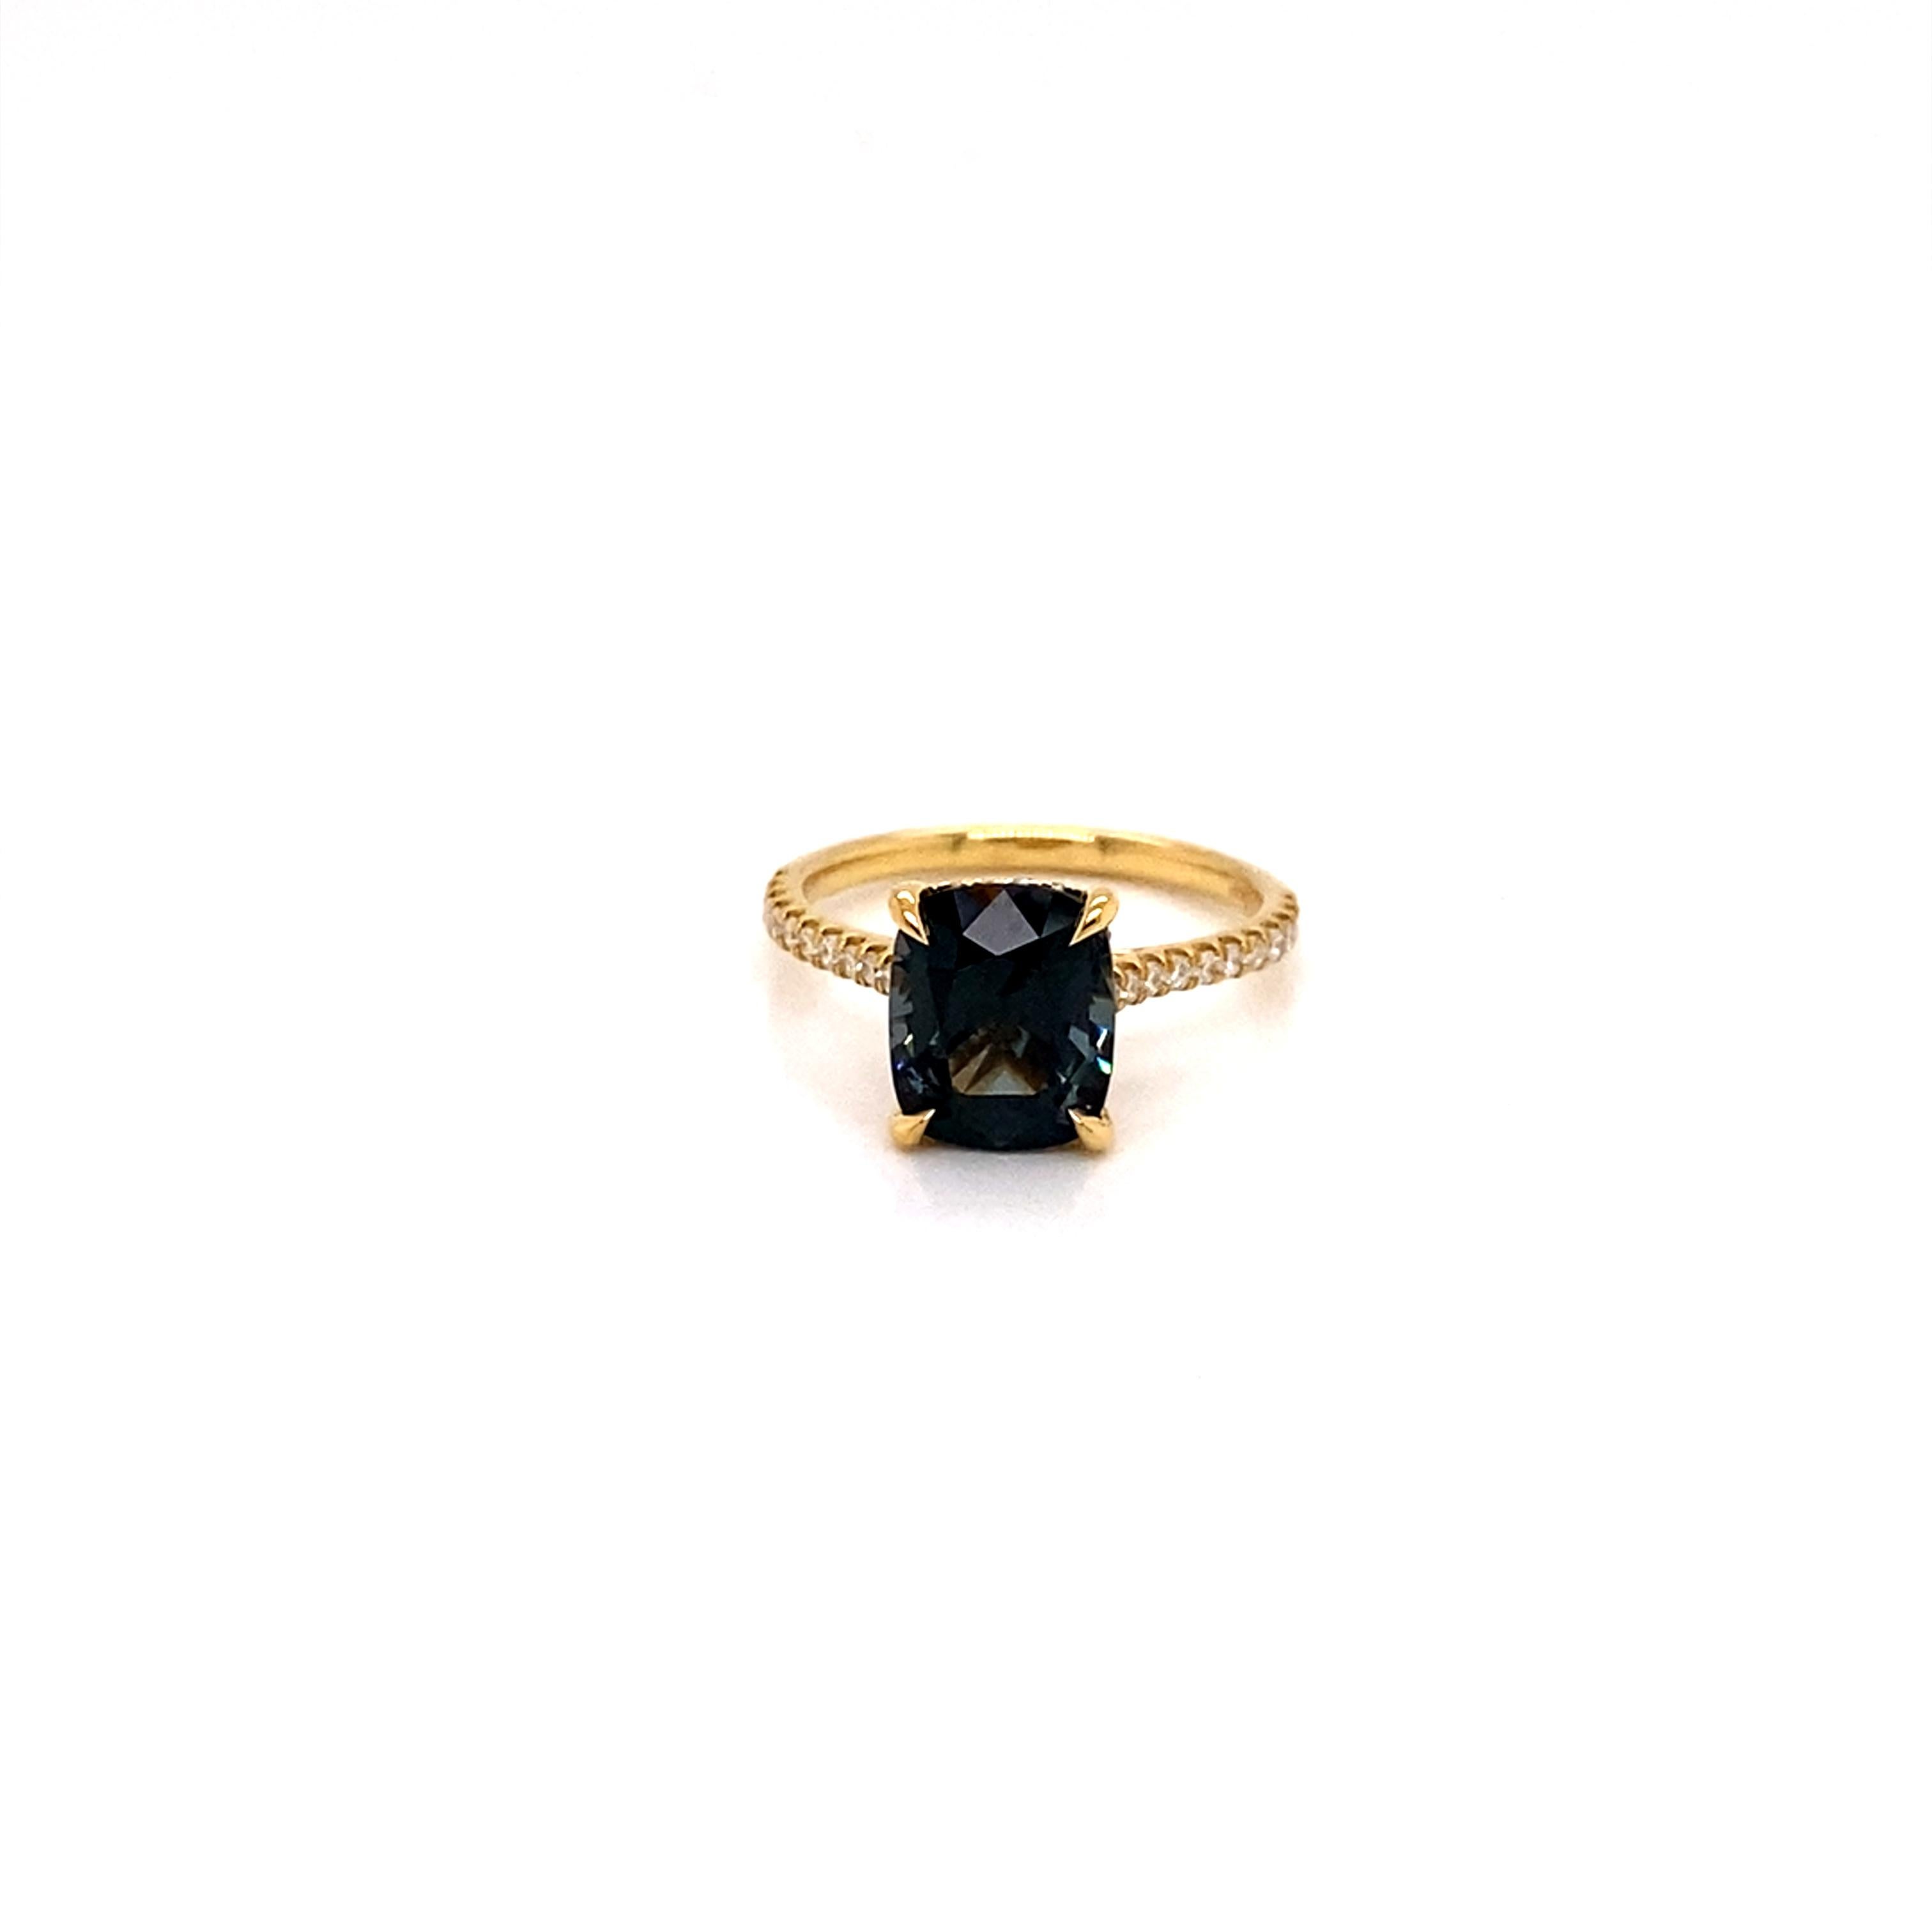 A stunning 3.03ct Smoky Teal Spinel is the center piece if this wonderfully glamorous ring. 
The natural spinel is set in high polish 18k yellow gold band and accentuated with both shimmering diamonds on the band and a luxurious hidden diamond halo